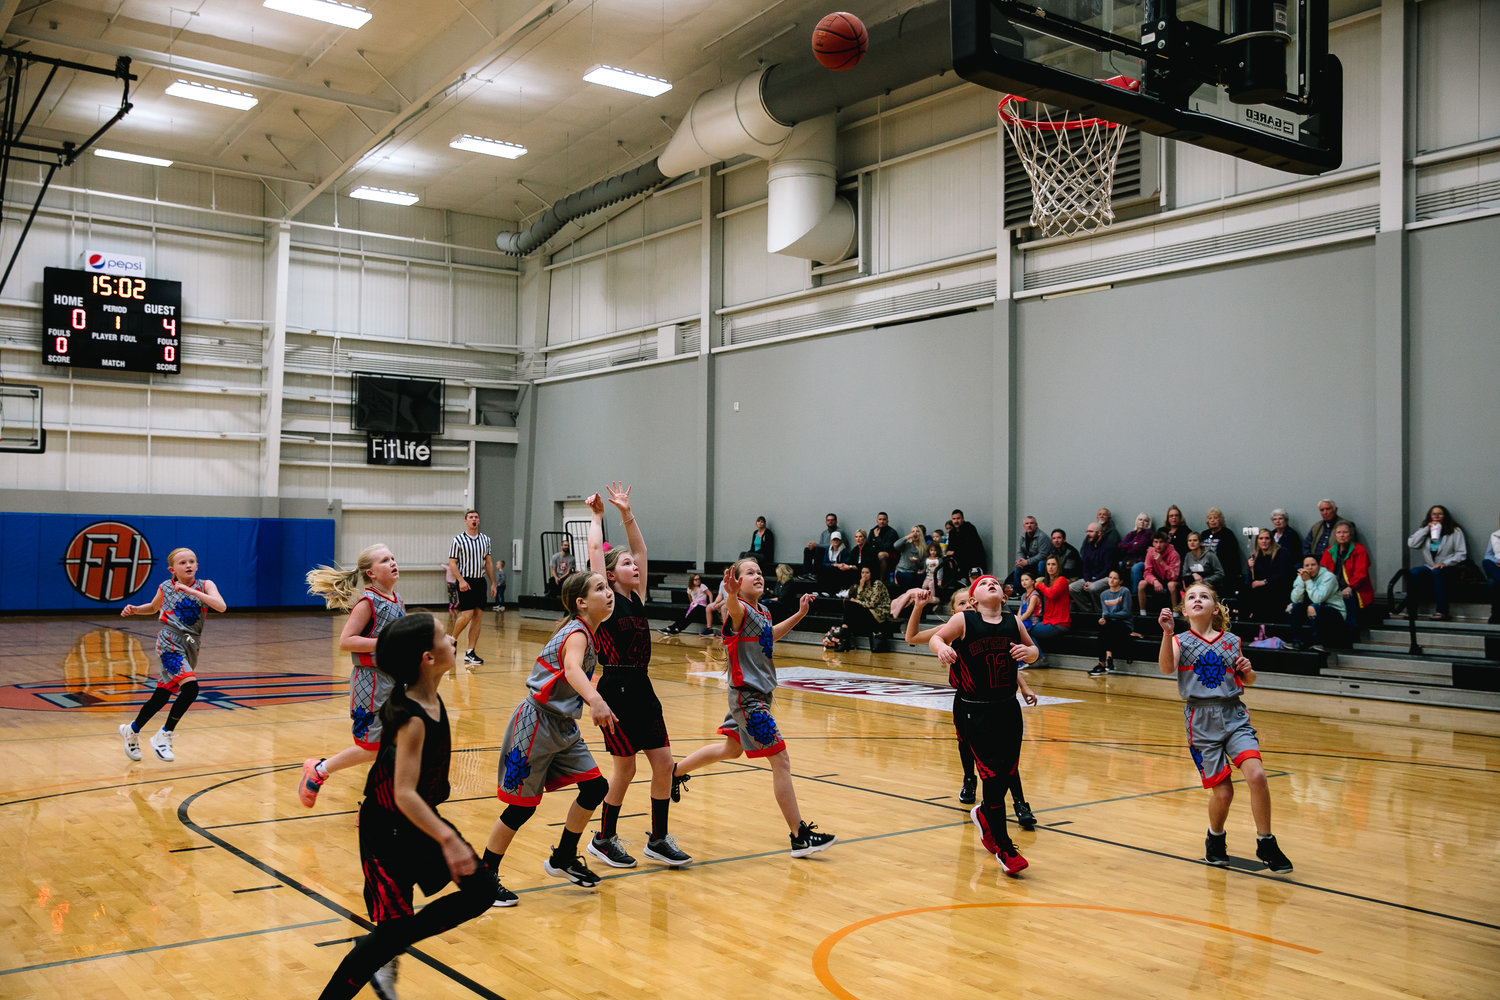 Local youths are among those who enjoy league play at the Fieldhouse Sportscenter, purchased recently by the city with sports tourism dollars in mind.